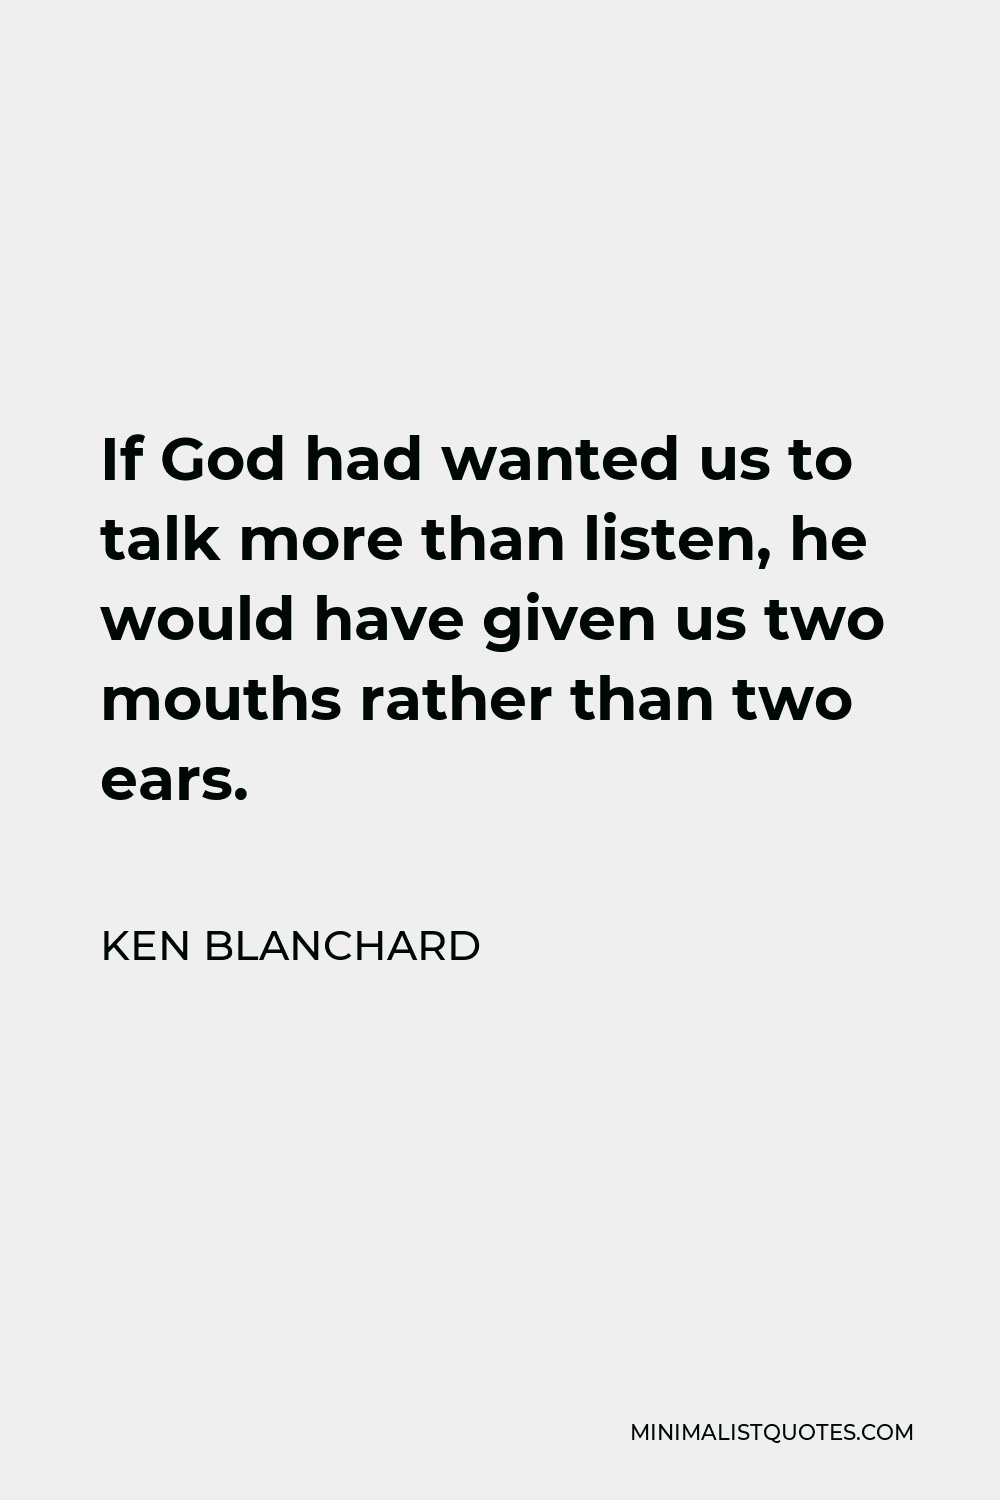 Ken Blanchard Quote - If God had wanted us to talk more than listen, he would have given us two mouths rather than two ears.